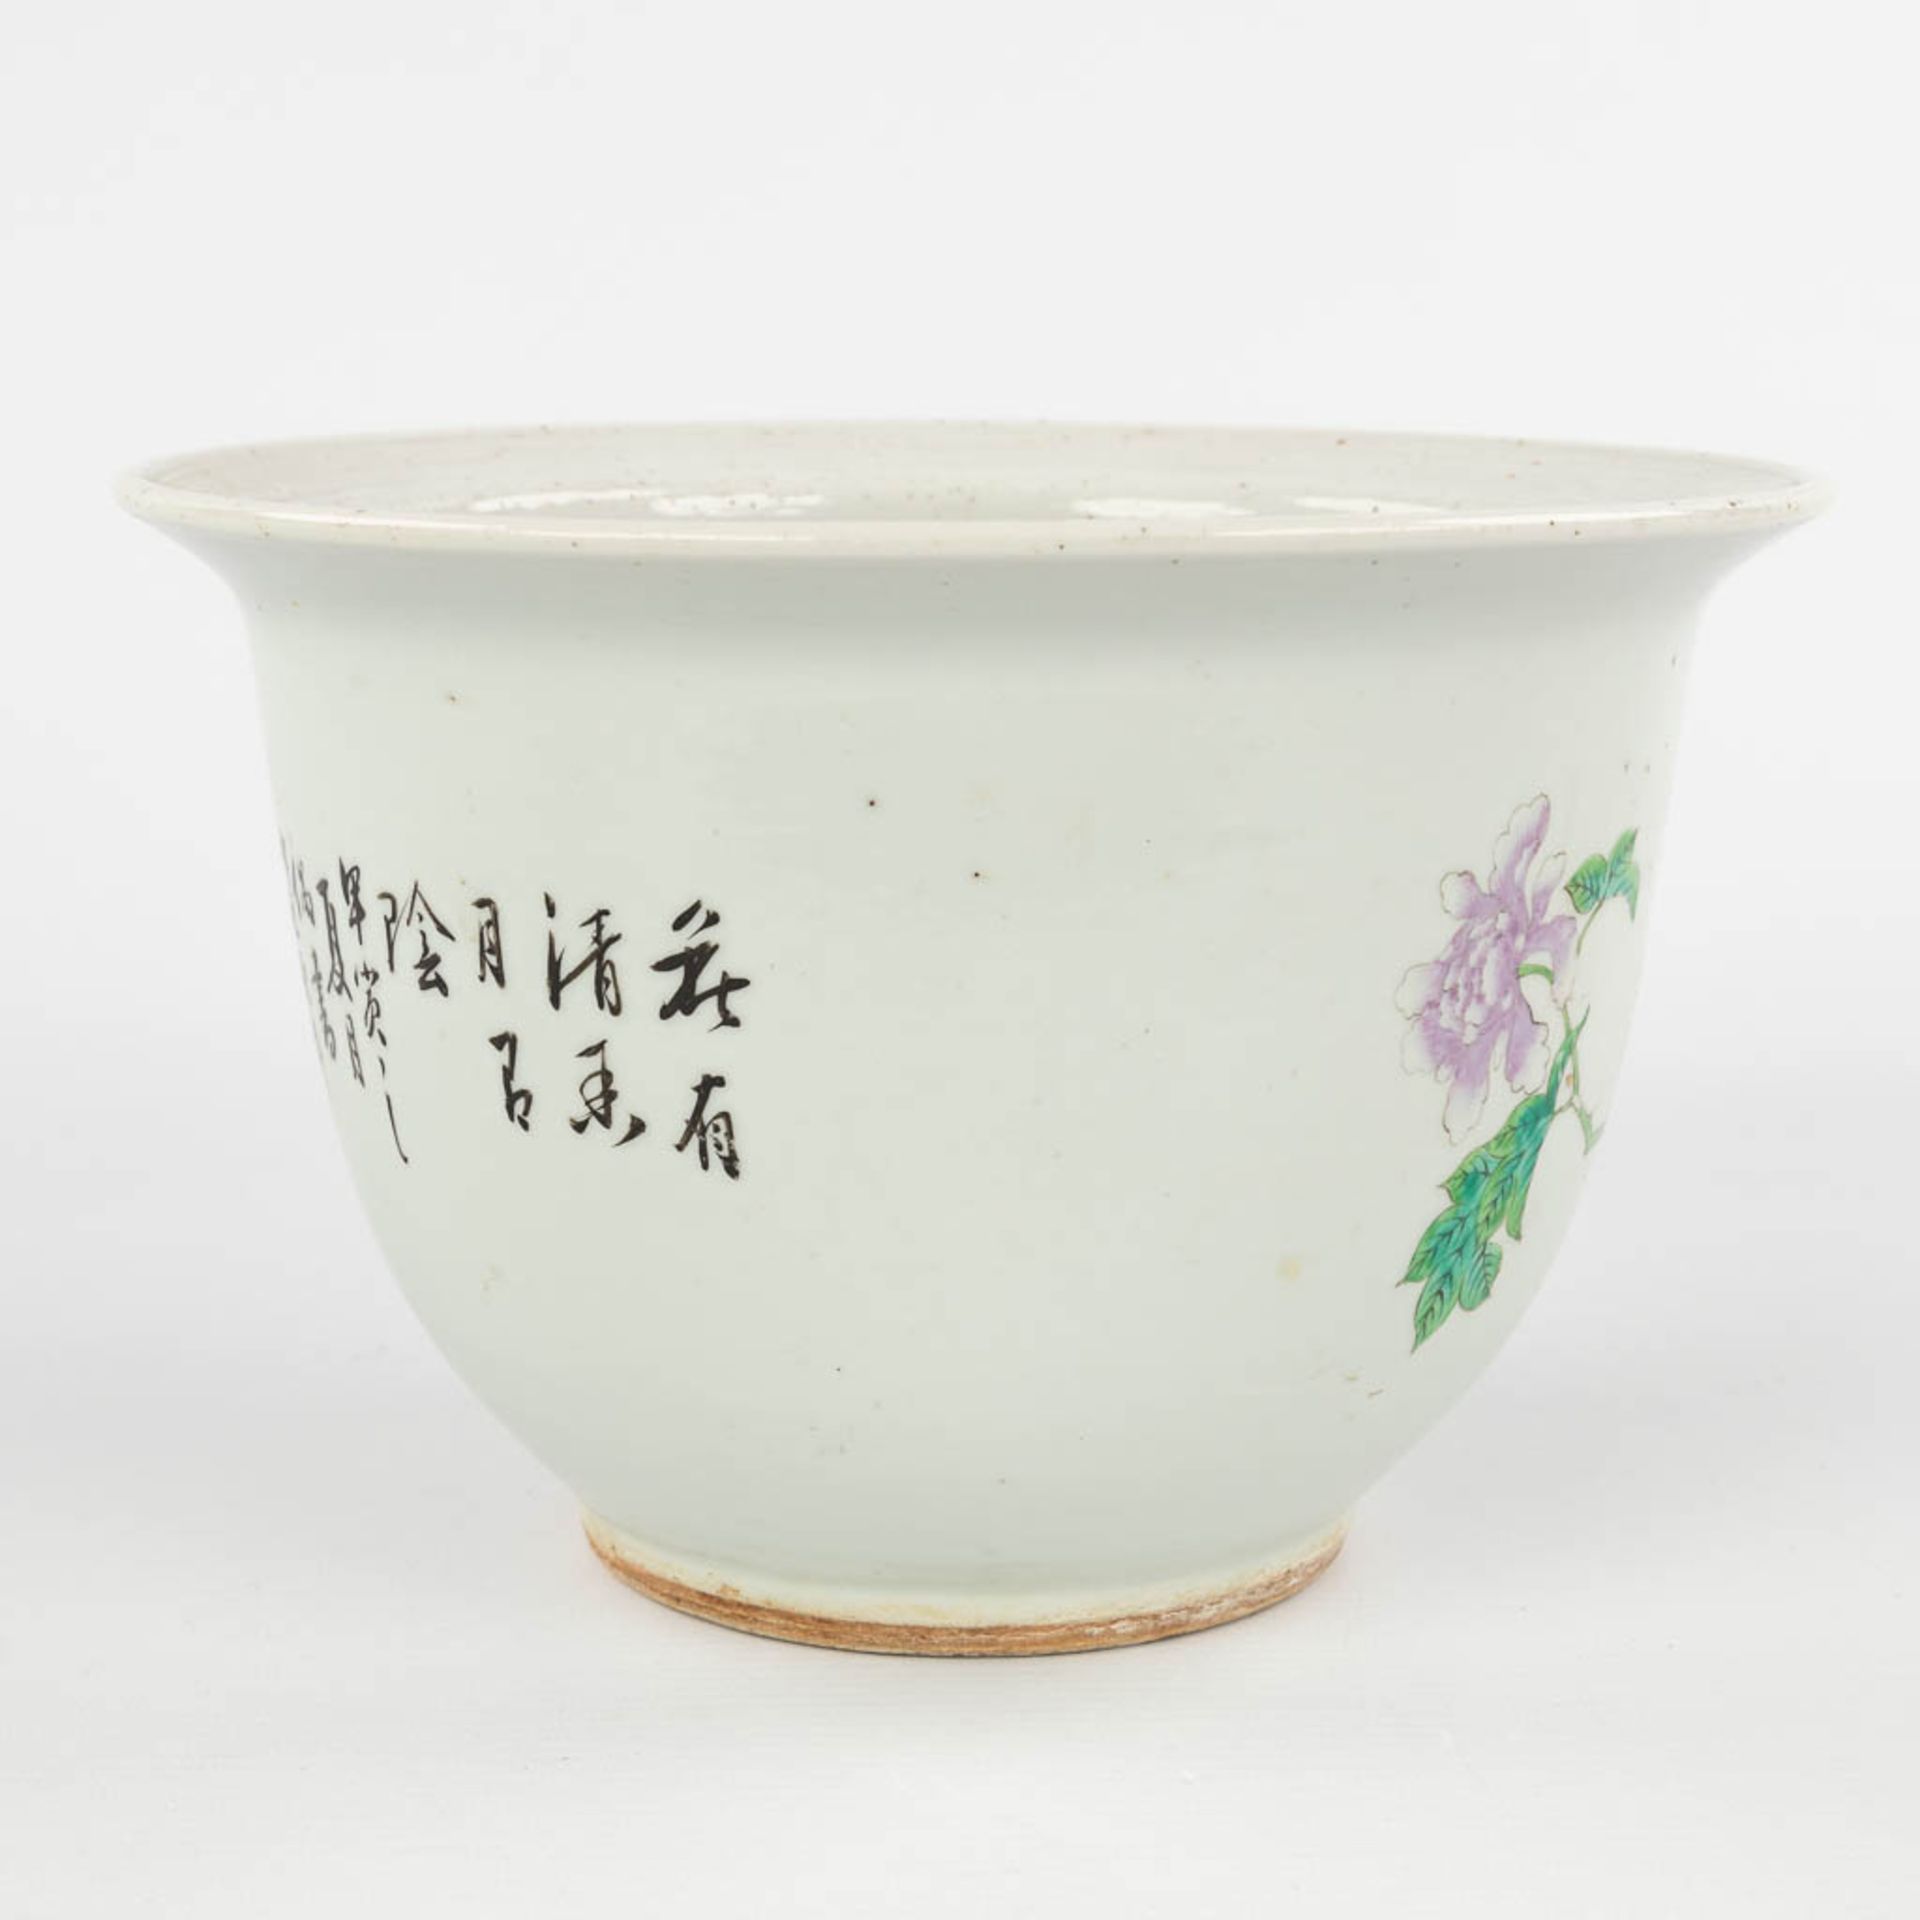 A Chinese Famille Rose cache pot, decorated with flowers. 19th/20th C. (H:15,5 x D:23,5 cm) - Image 4 of 10